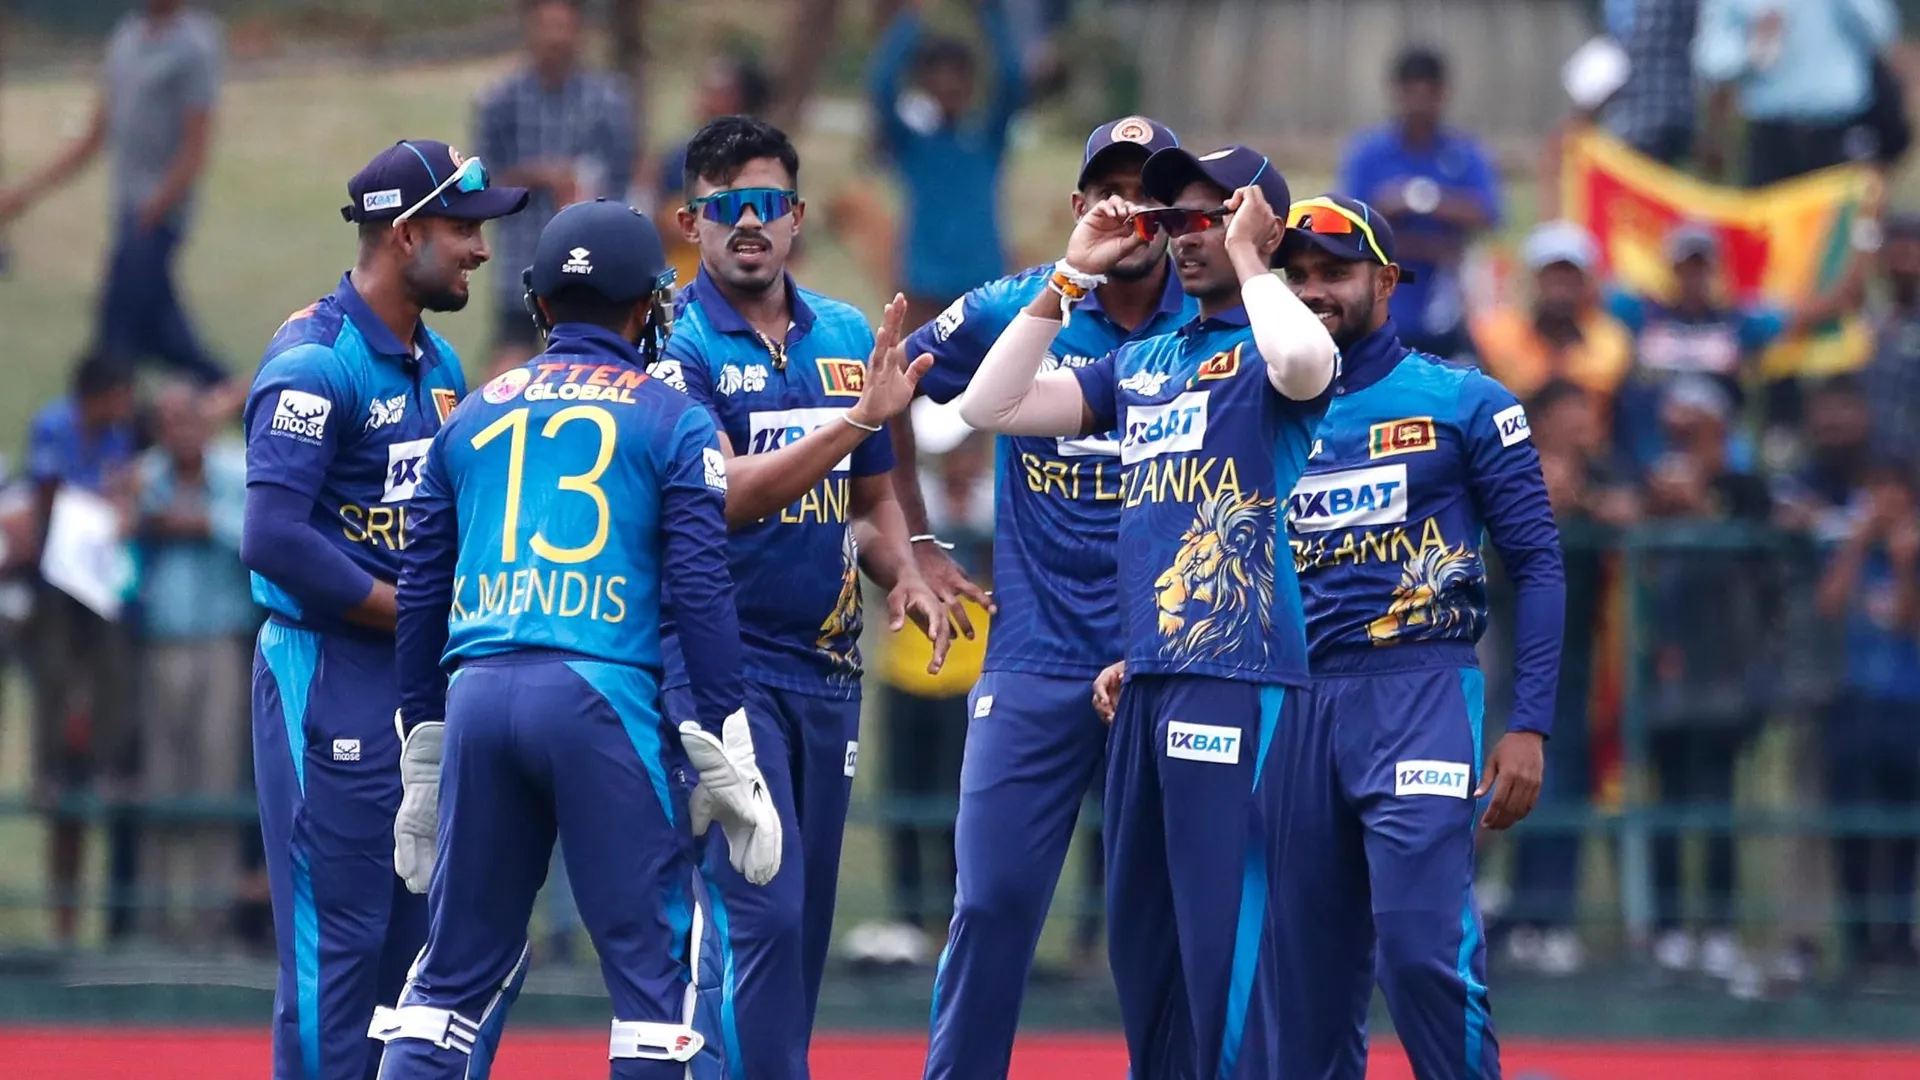 Sri Lanka suffers an injury setback before of the Asia Cup final.